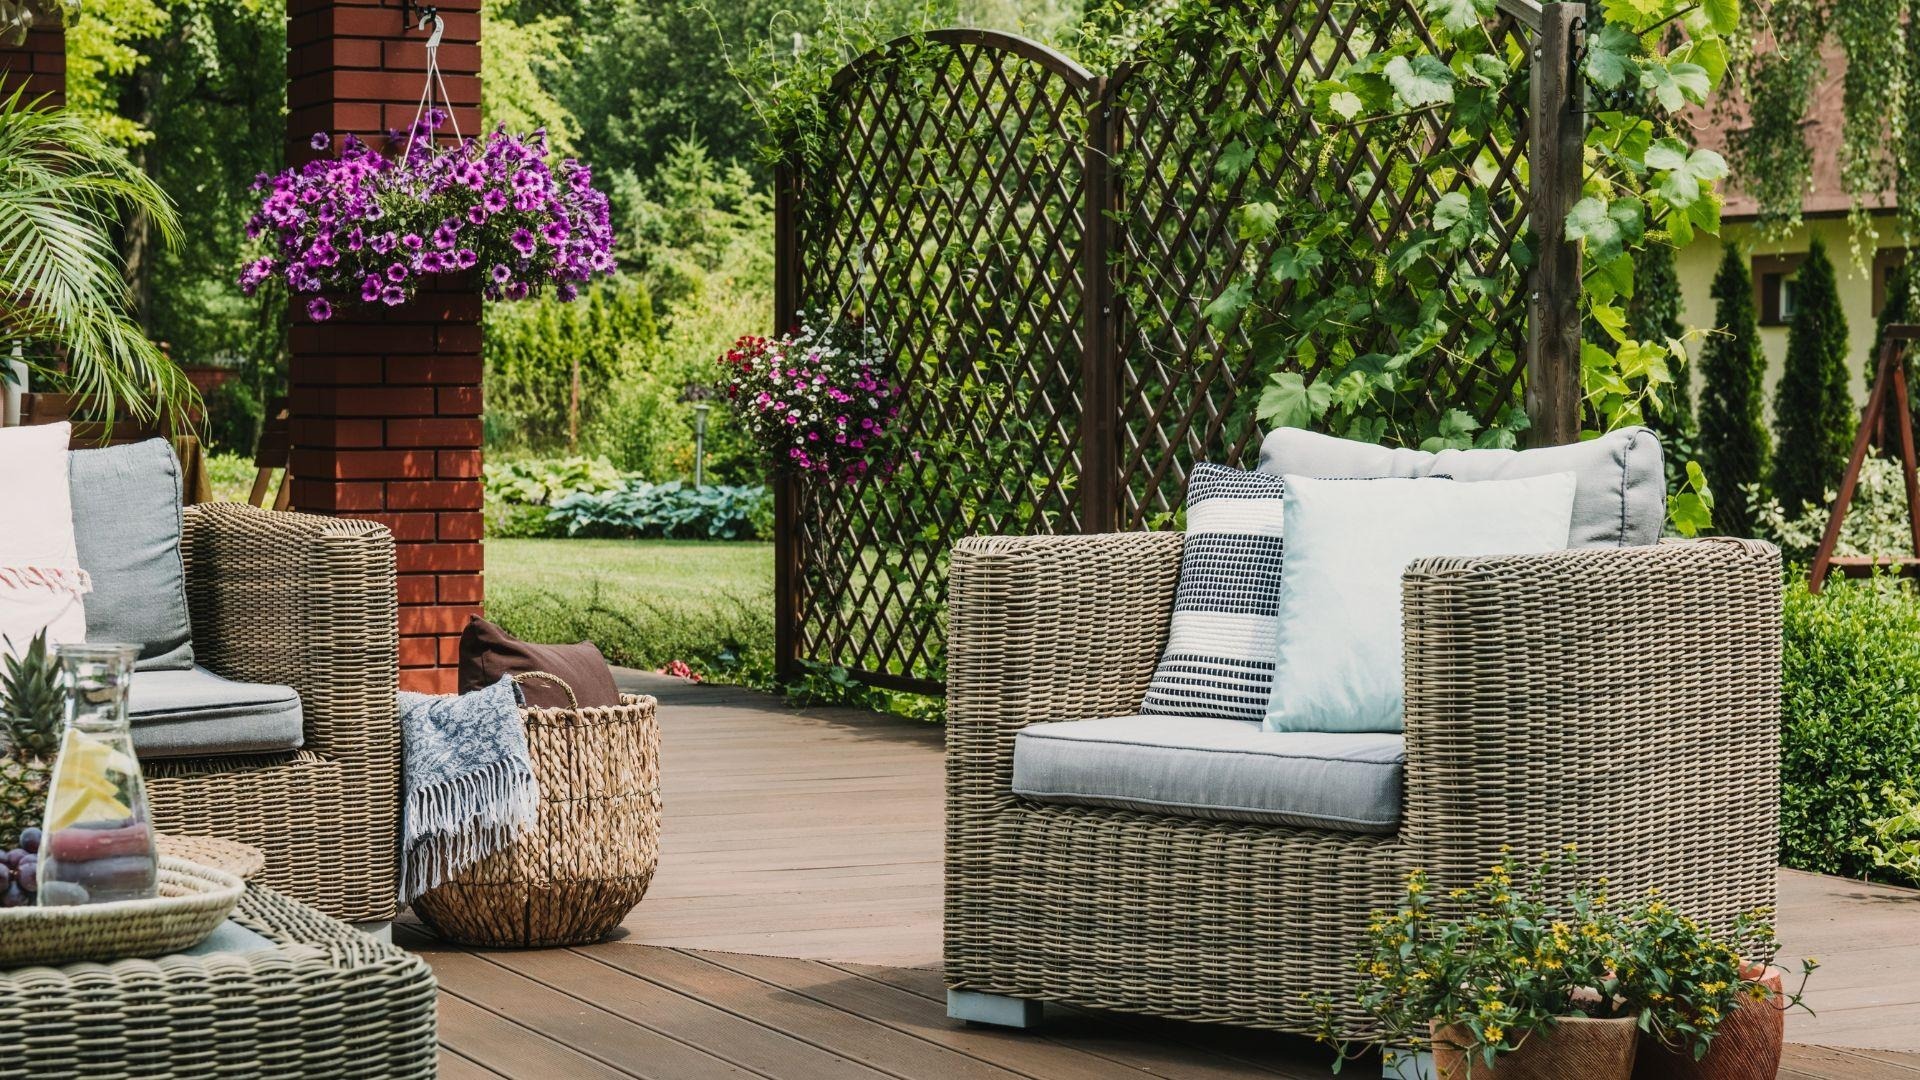 Furnishing_the_outdoor_spaces_ideas_to_create_a_relaxing_oasis_in_your_garden_IDW_Italia-Prague-Biella